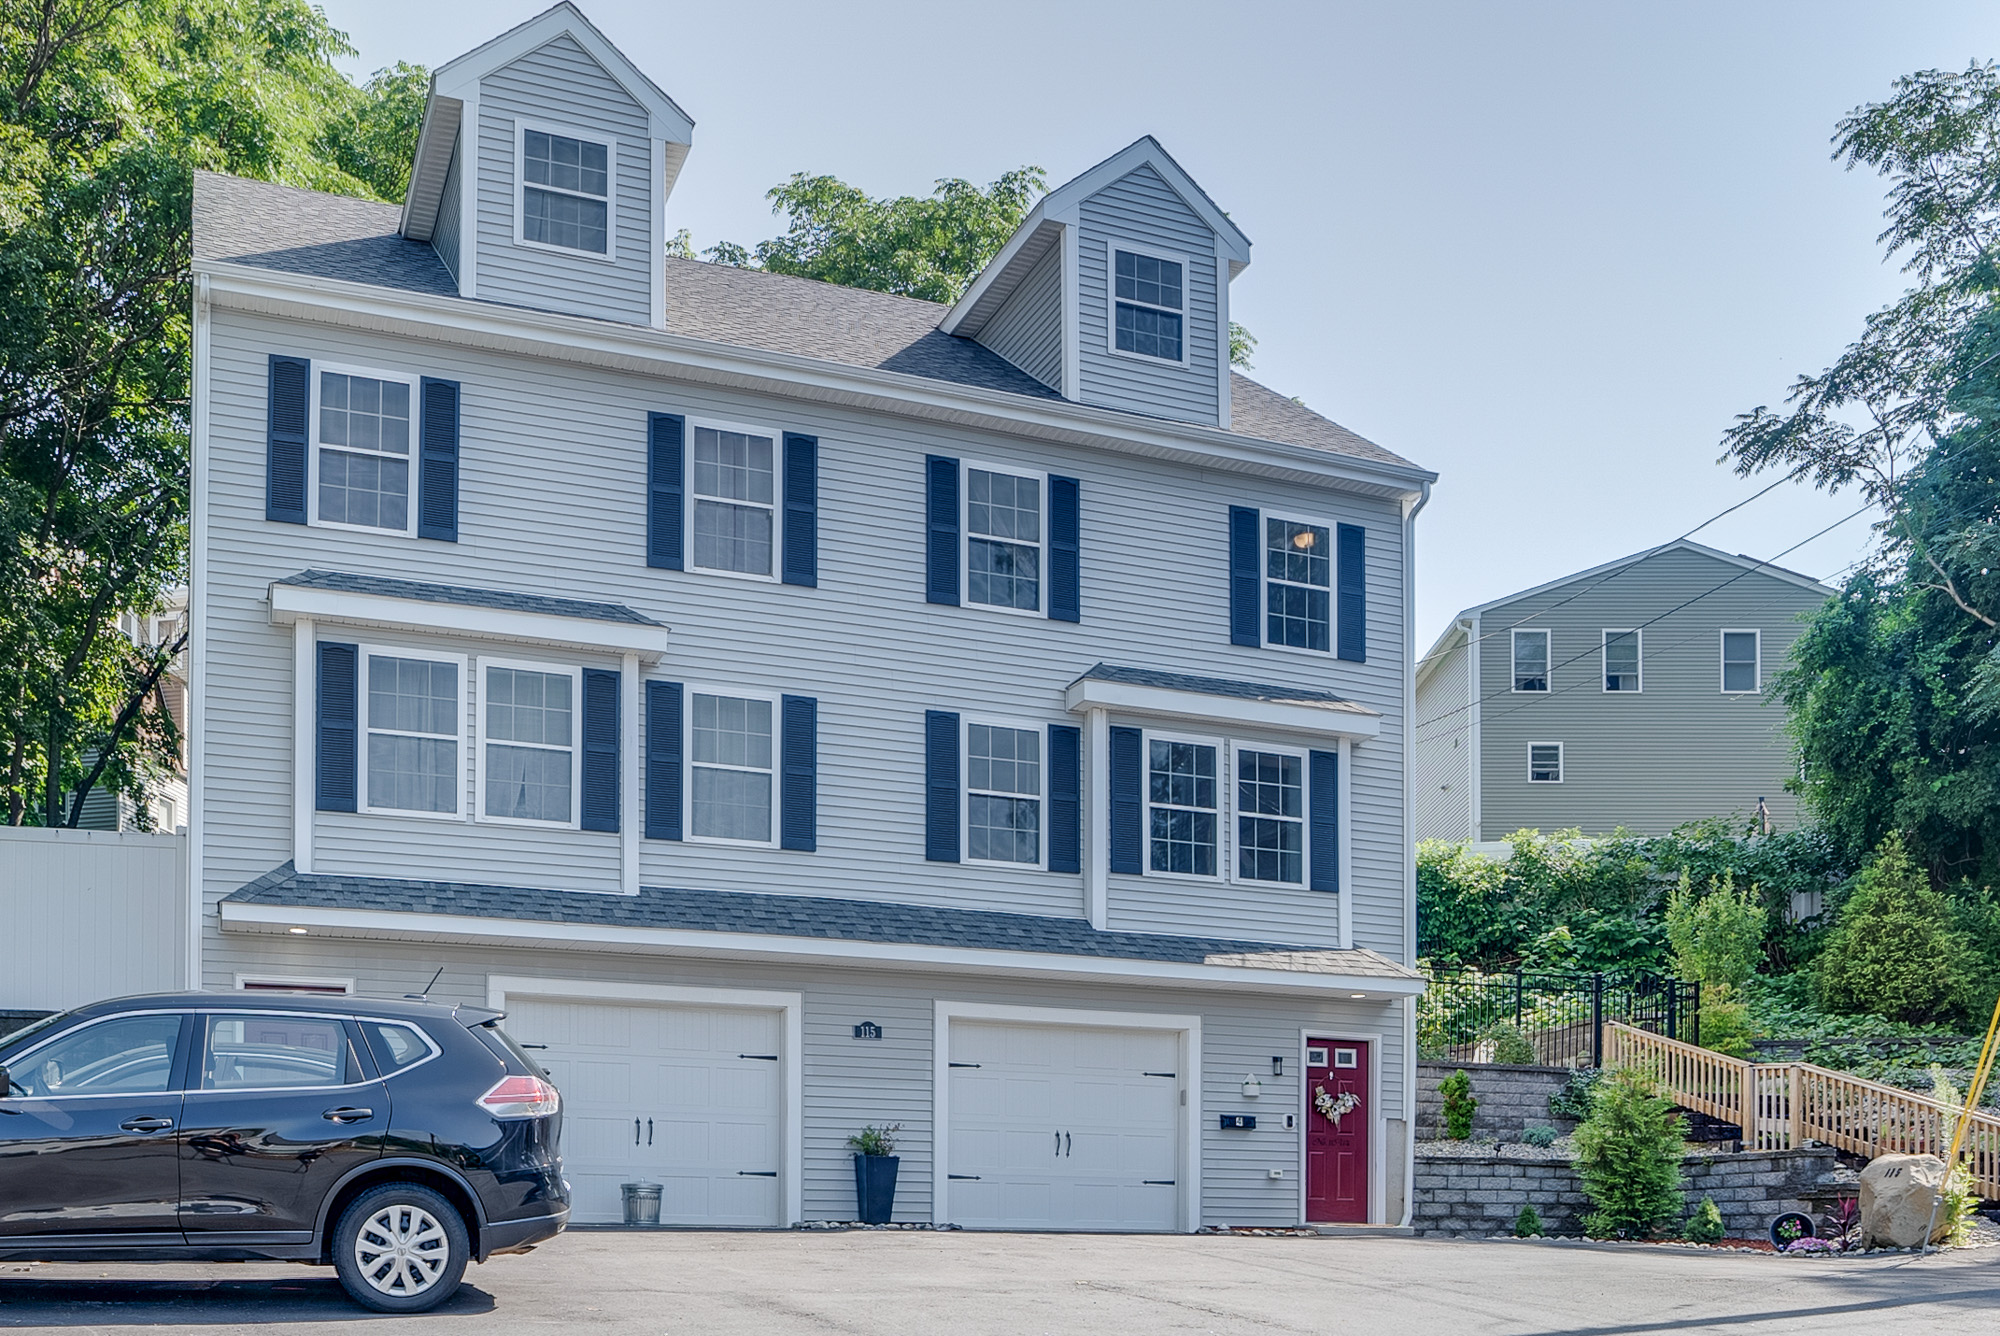 New to the Market in Lawrence, MA, 2008, 3 Bed/2.5 Baths Condo!